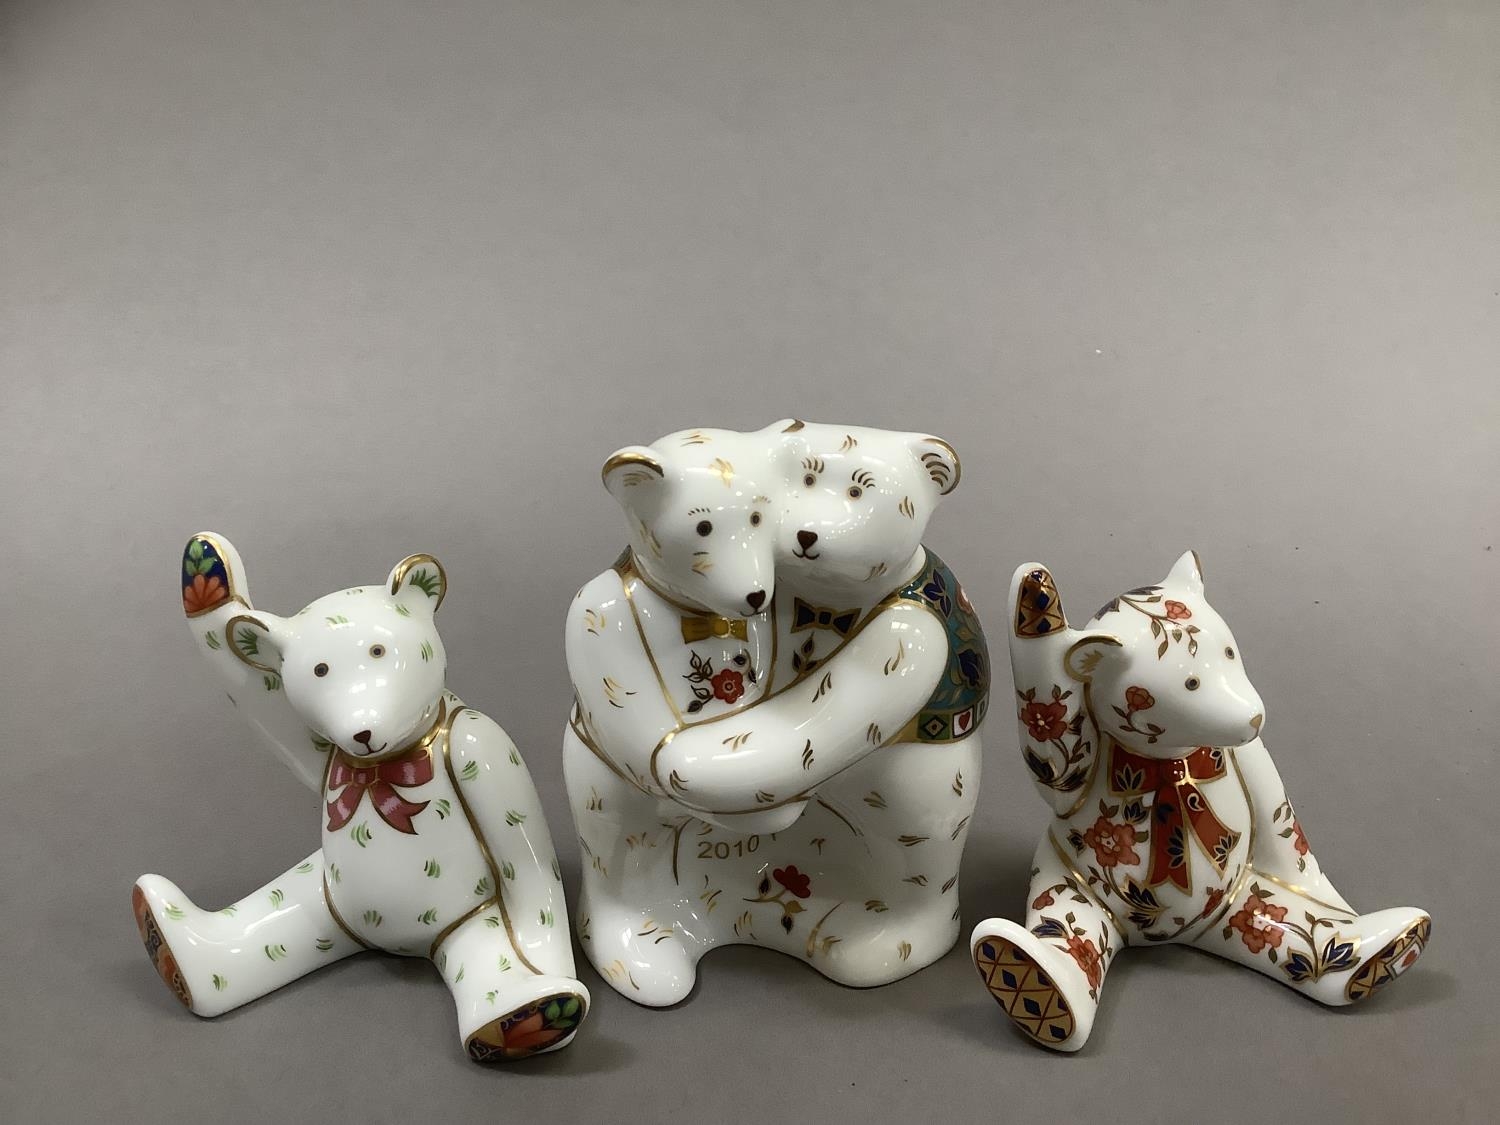 A group of Royal Crown Derby teddy bears including two bears hugging with year 2010 and two seated - Image 2 of 4